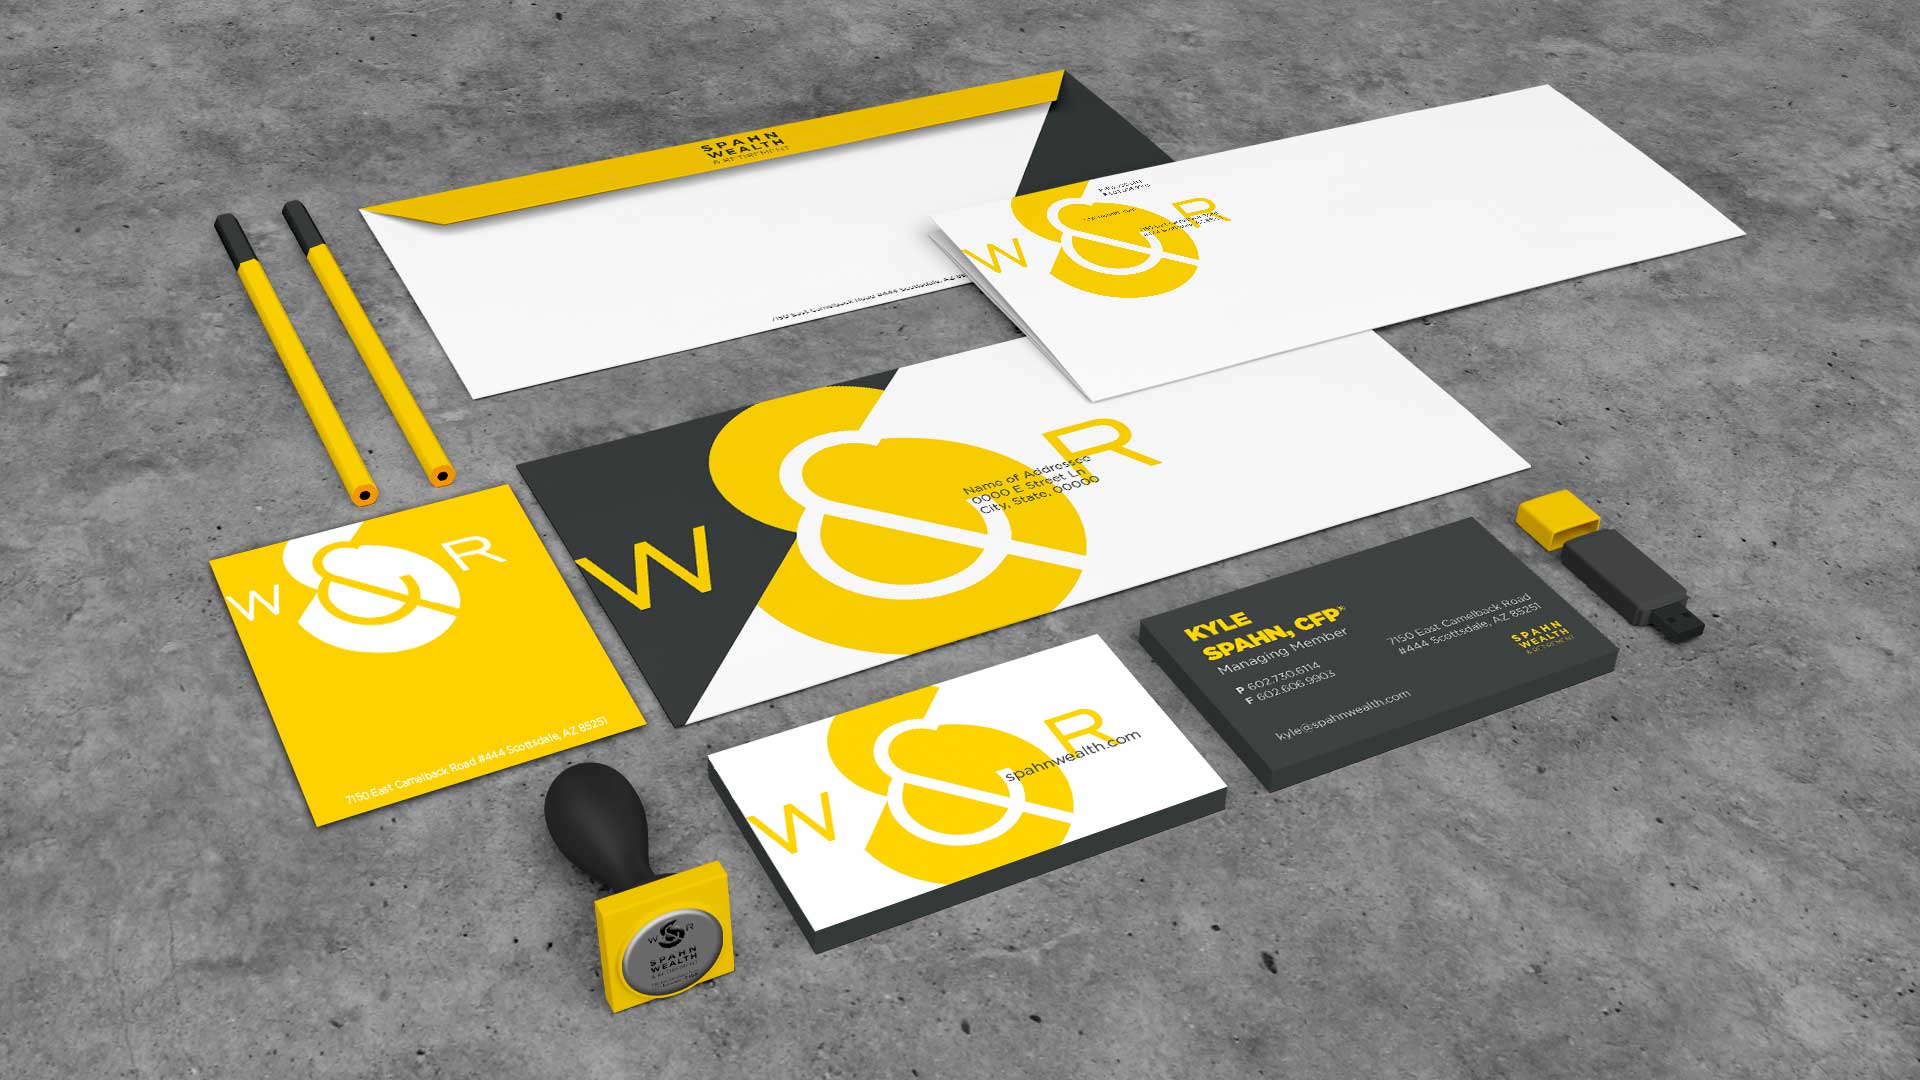 Spahn business system: envelope, letterhead, post-it notes, stamps, business cards